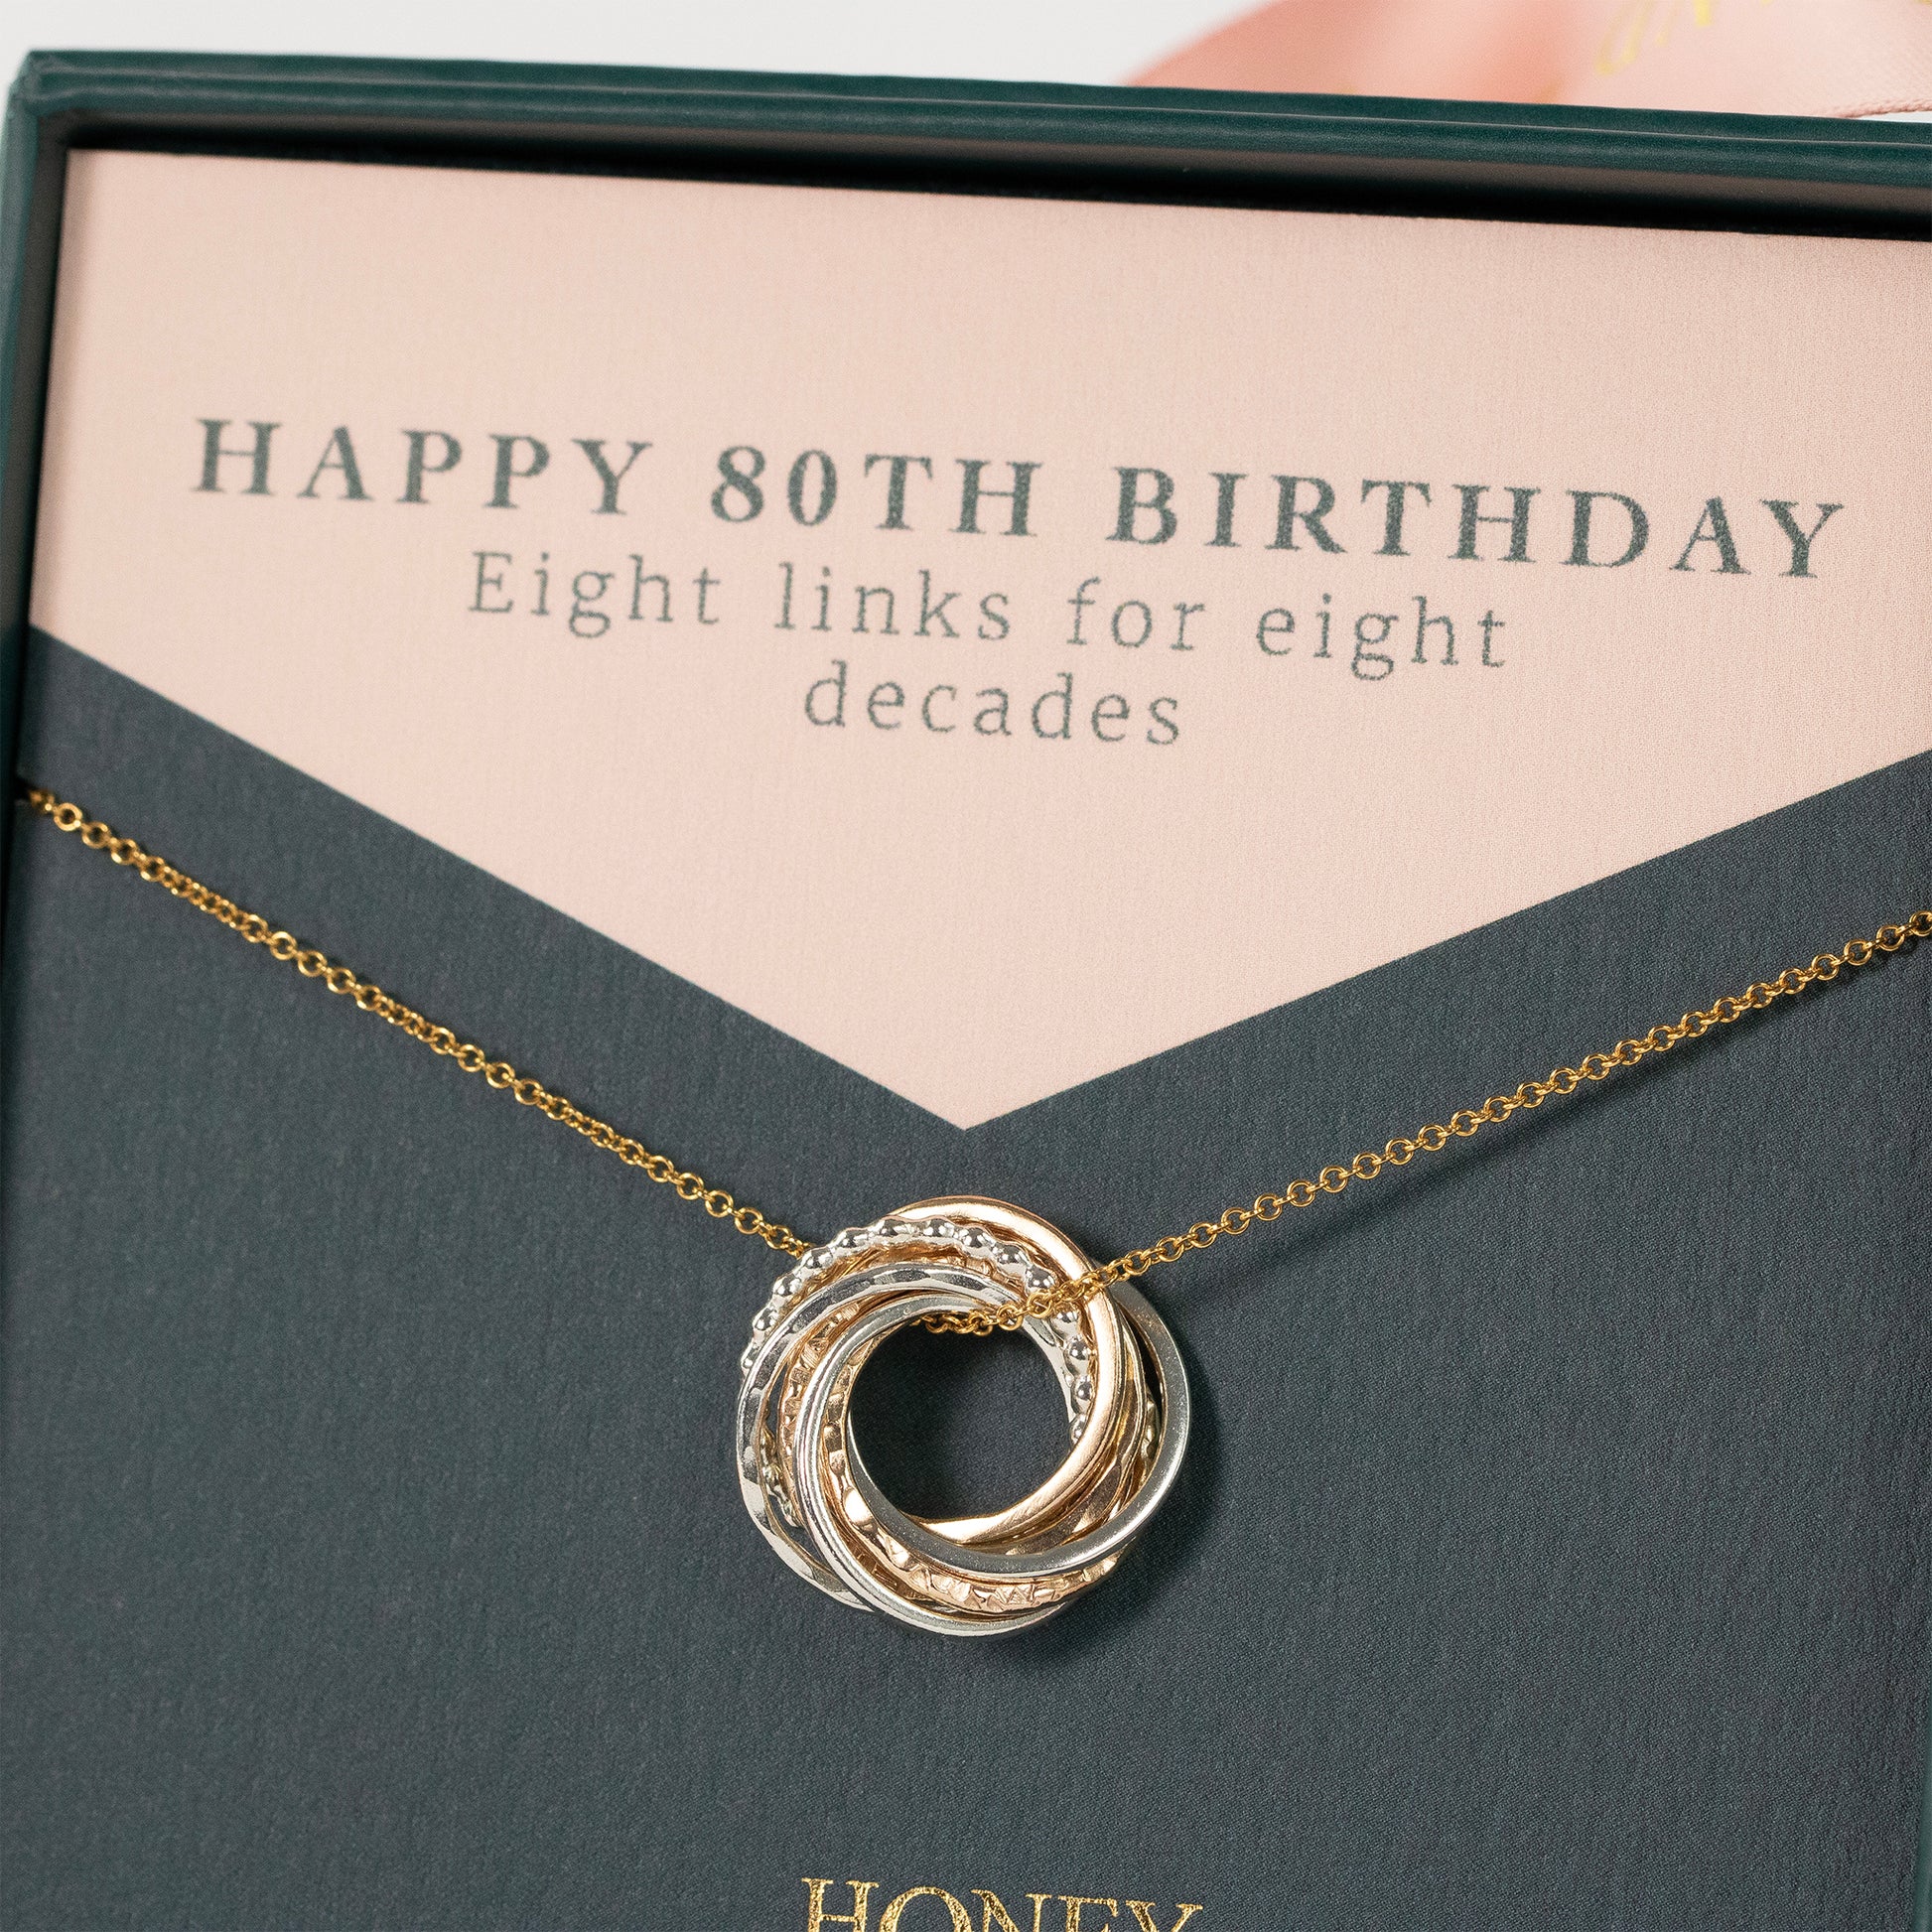 80th Birthday Necklace - The Original 8 Links for 8 Decades Necklace - Petite Silver & Gold